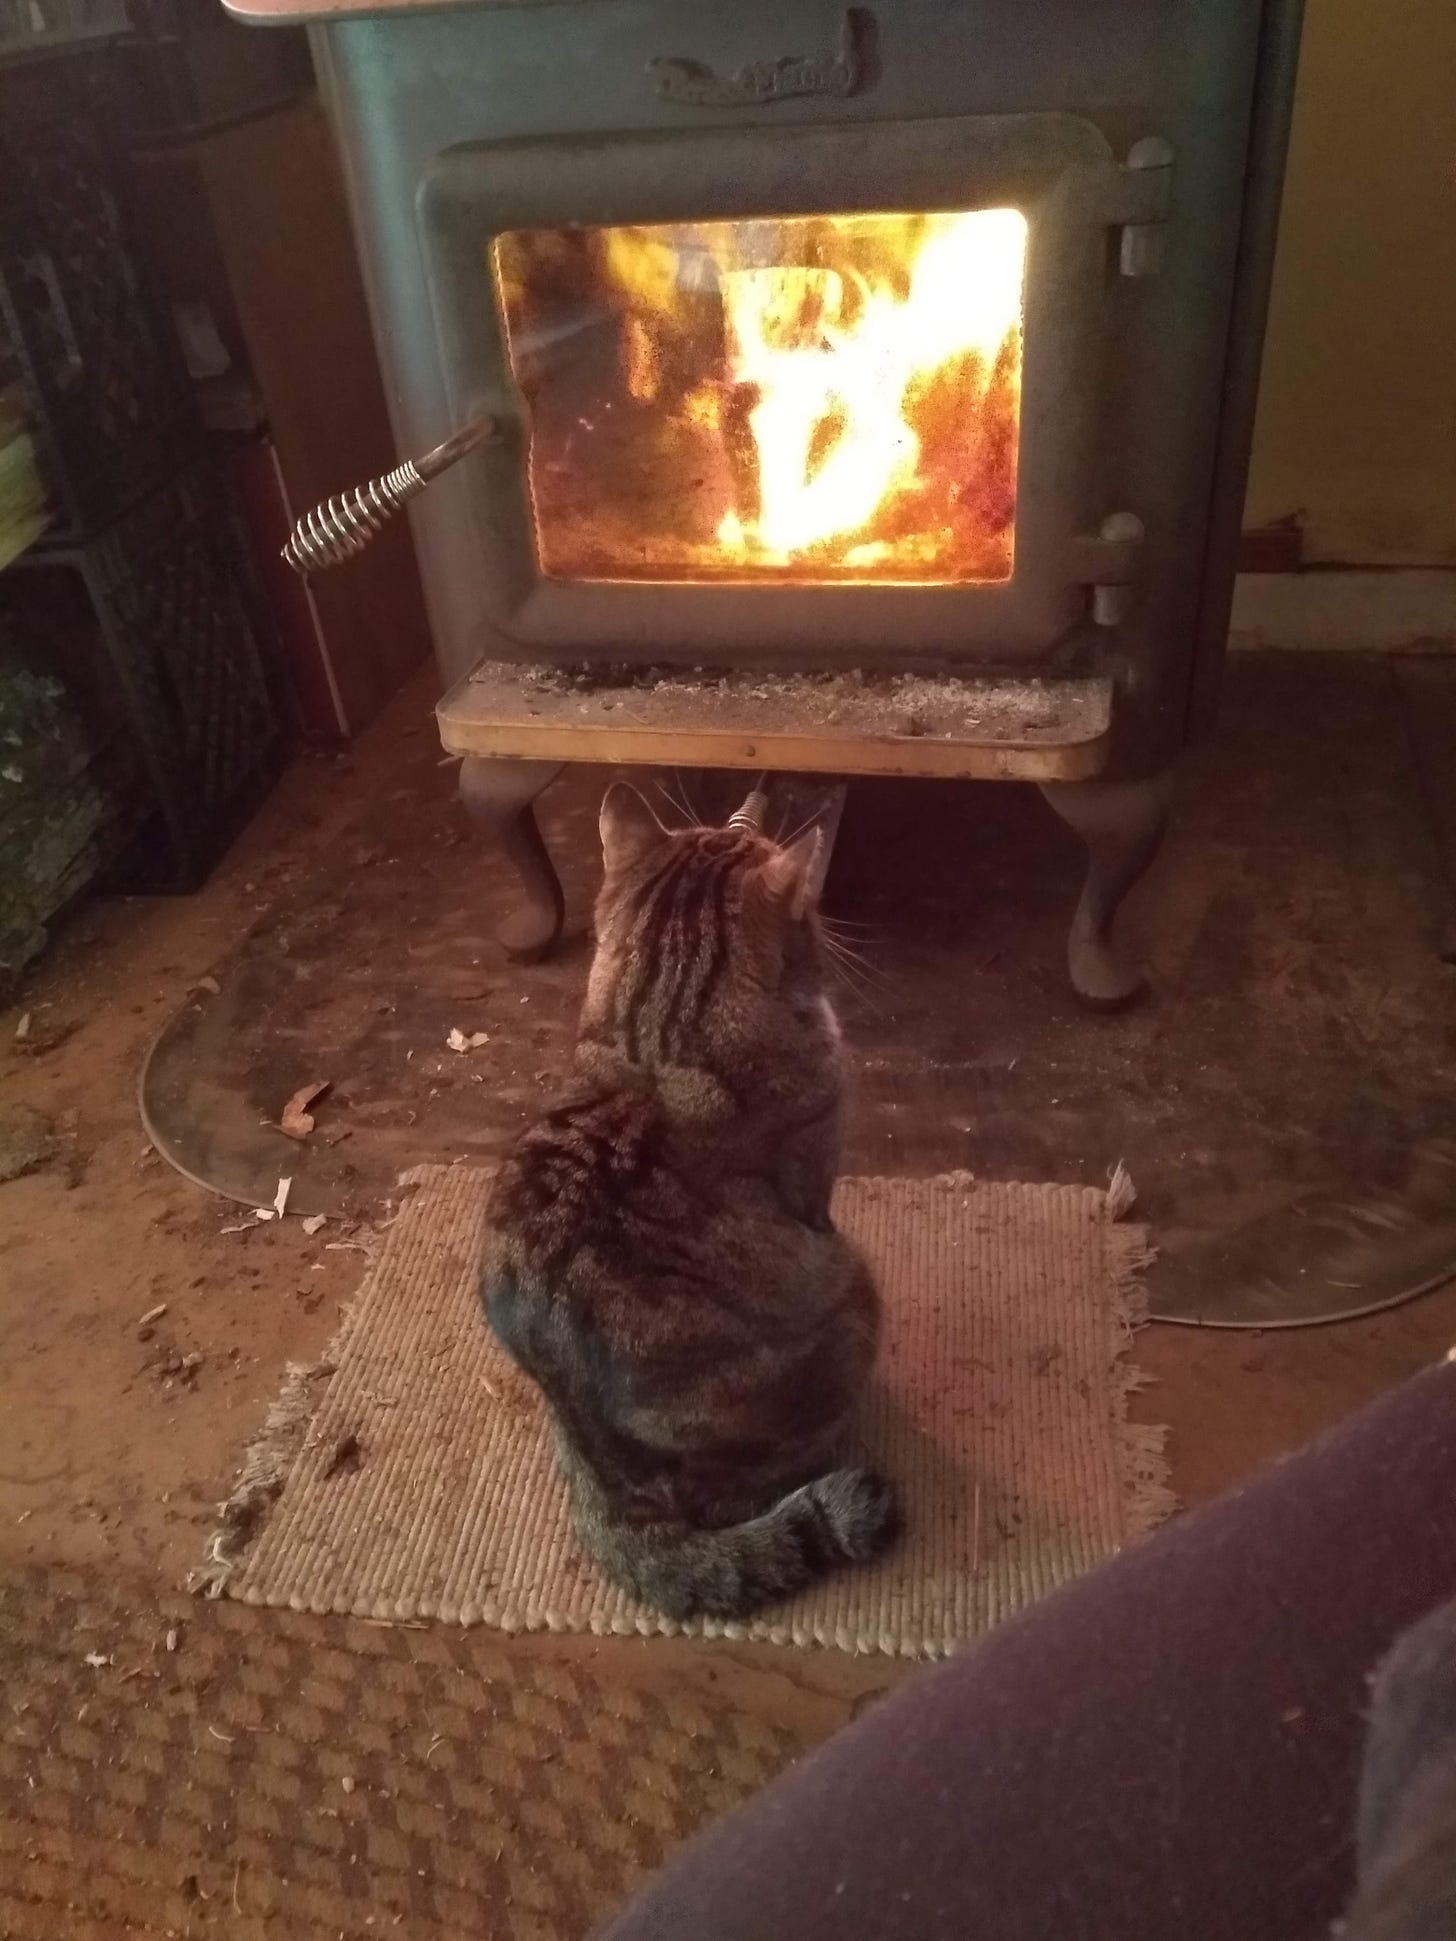 Artie sitting calmly in front of the lit woodstove